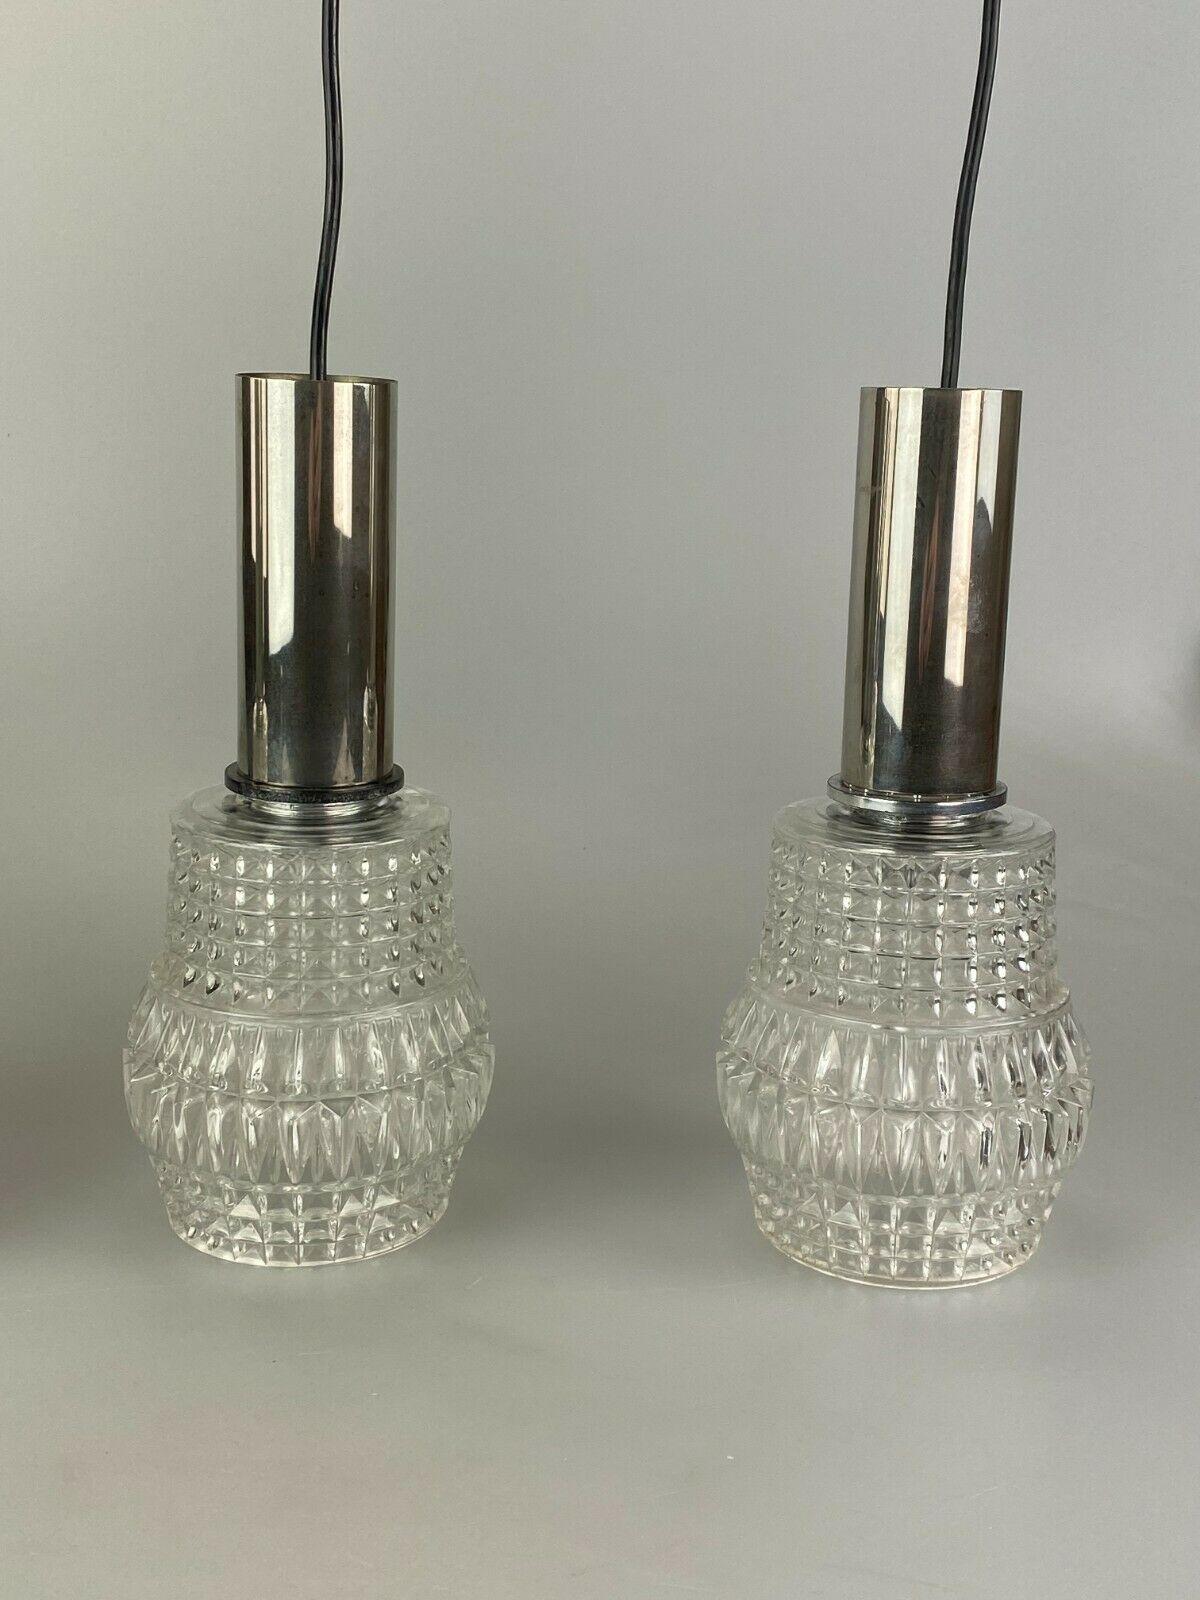 70s Ceiling Light Hanging Lamp Cascade Lamp Glass Chrome Space Age Design In Good Condition For Sale In Neuenkirchen, NI